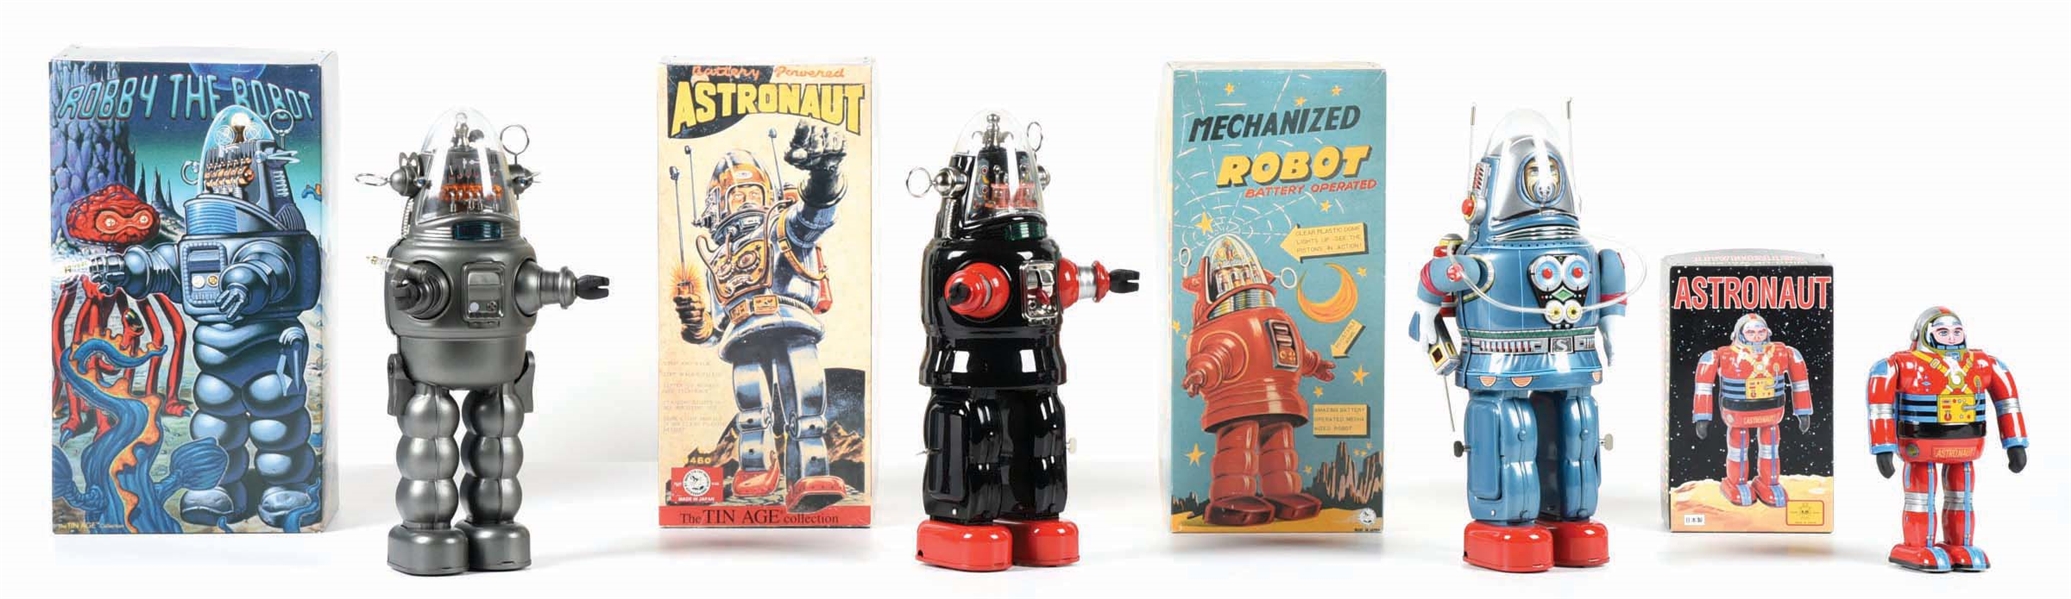 LOT OF 4: MORE CONTEMPORARY TIN LITHO WIND-UP & BATTERY-OPERATED JAPANESE ROBOT & ASTRONAUT TOYS IN ORIGINAL BOXES